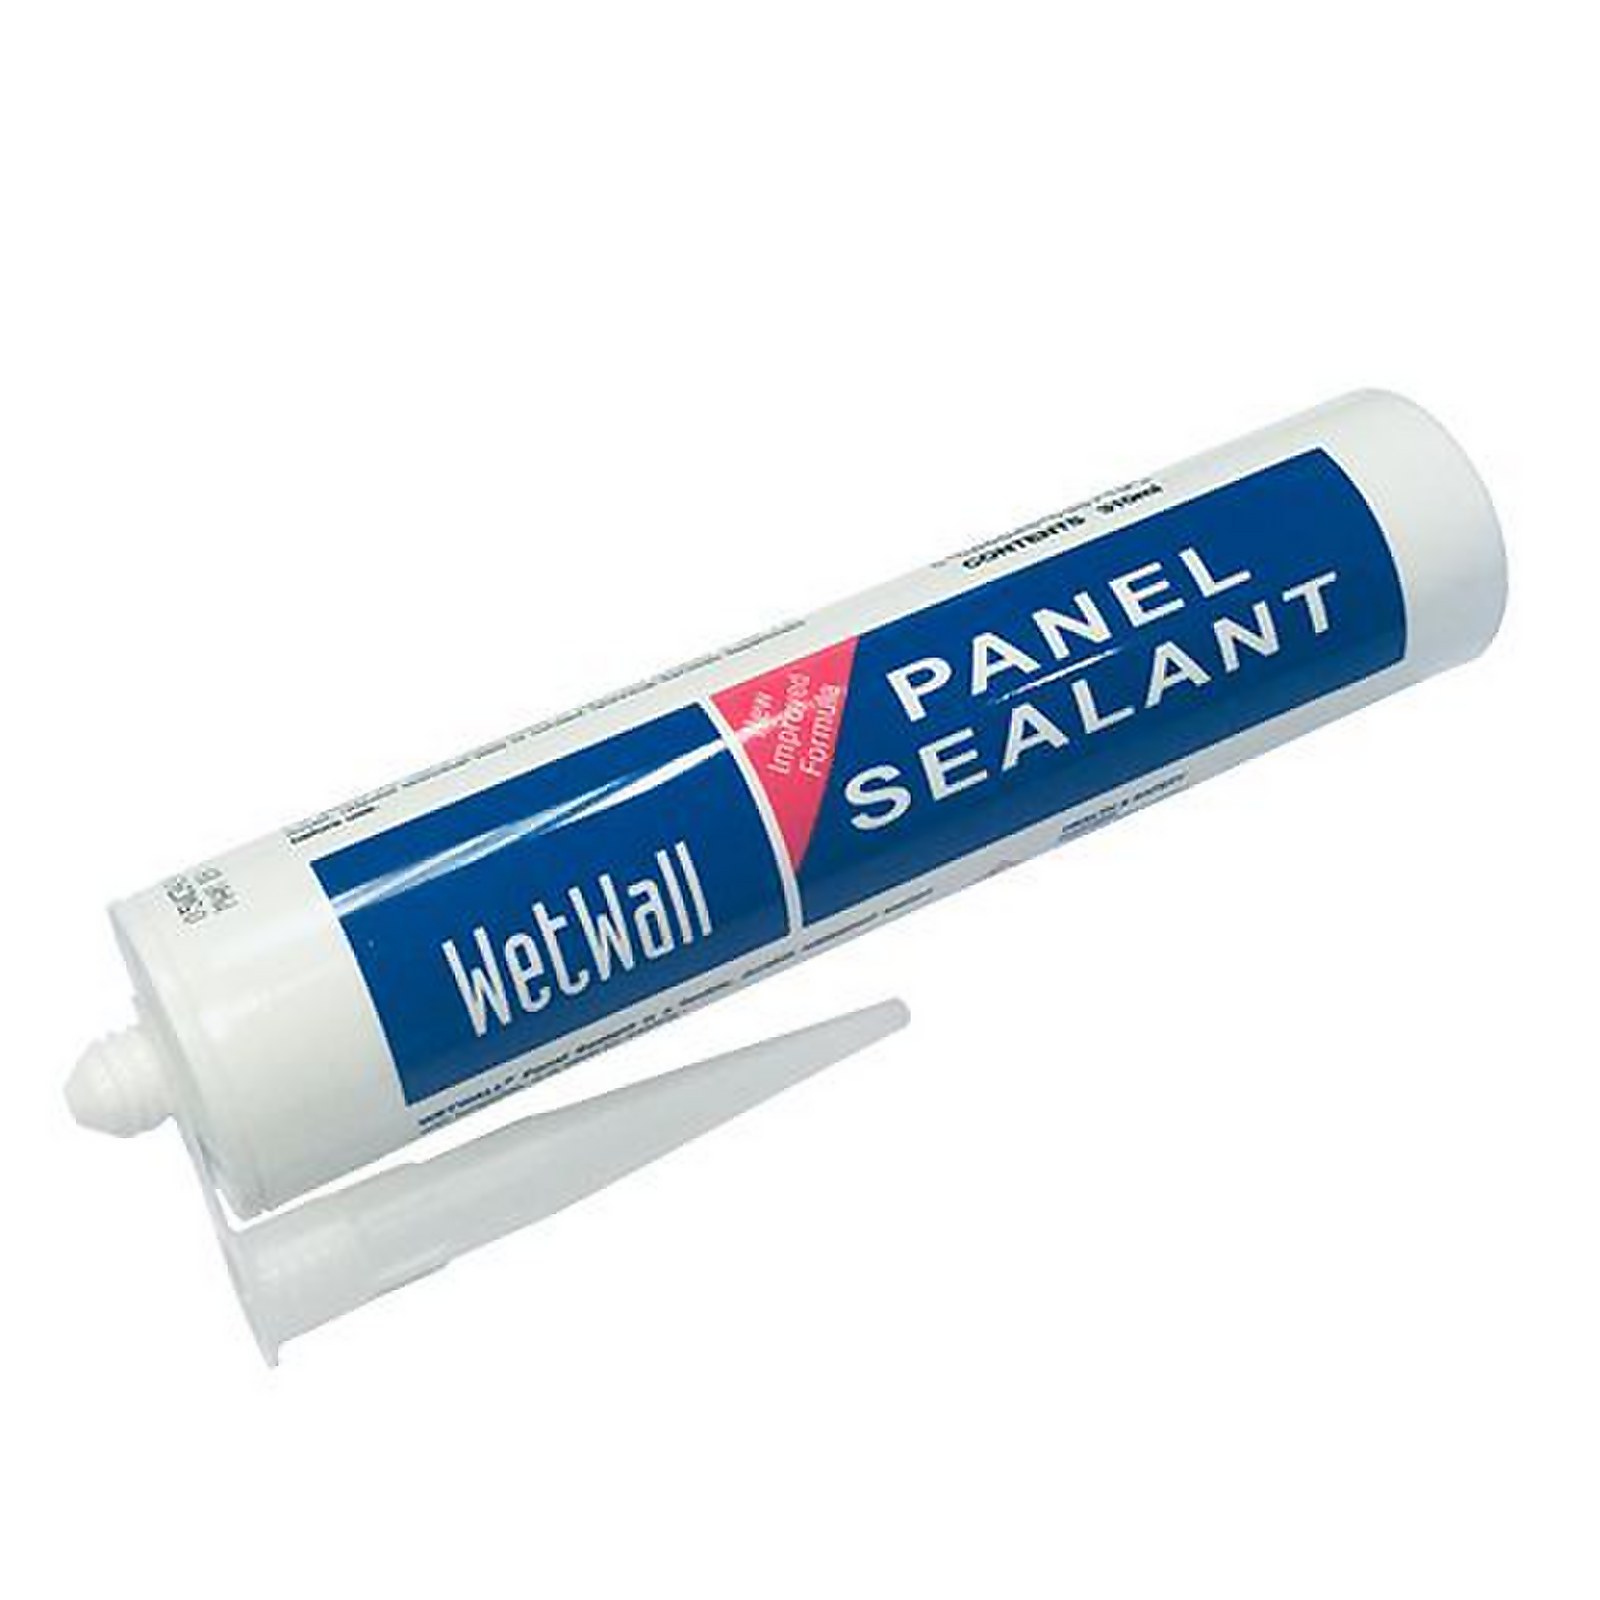 Photo of Wetwall Panel Sealant - Clear 310ml